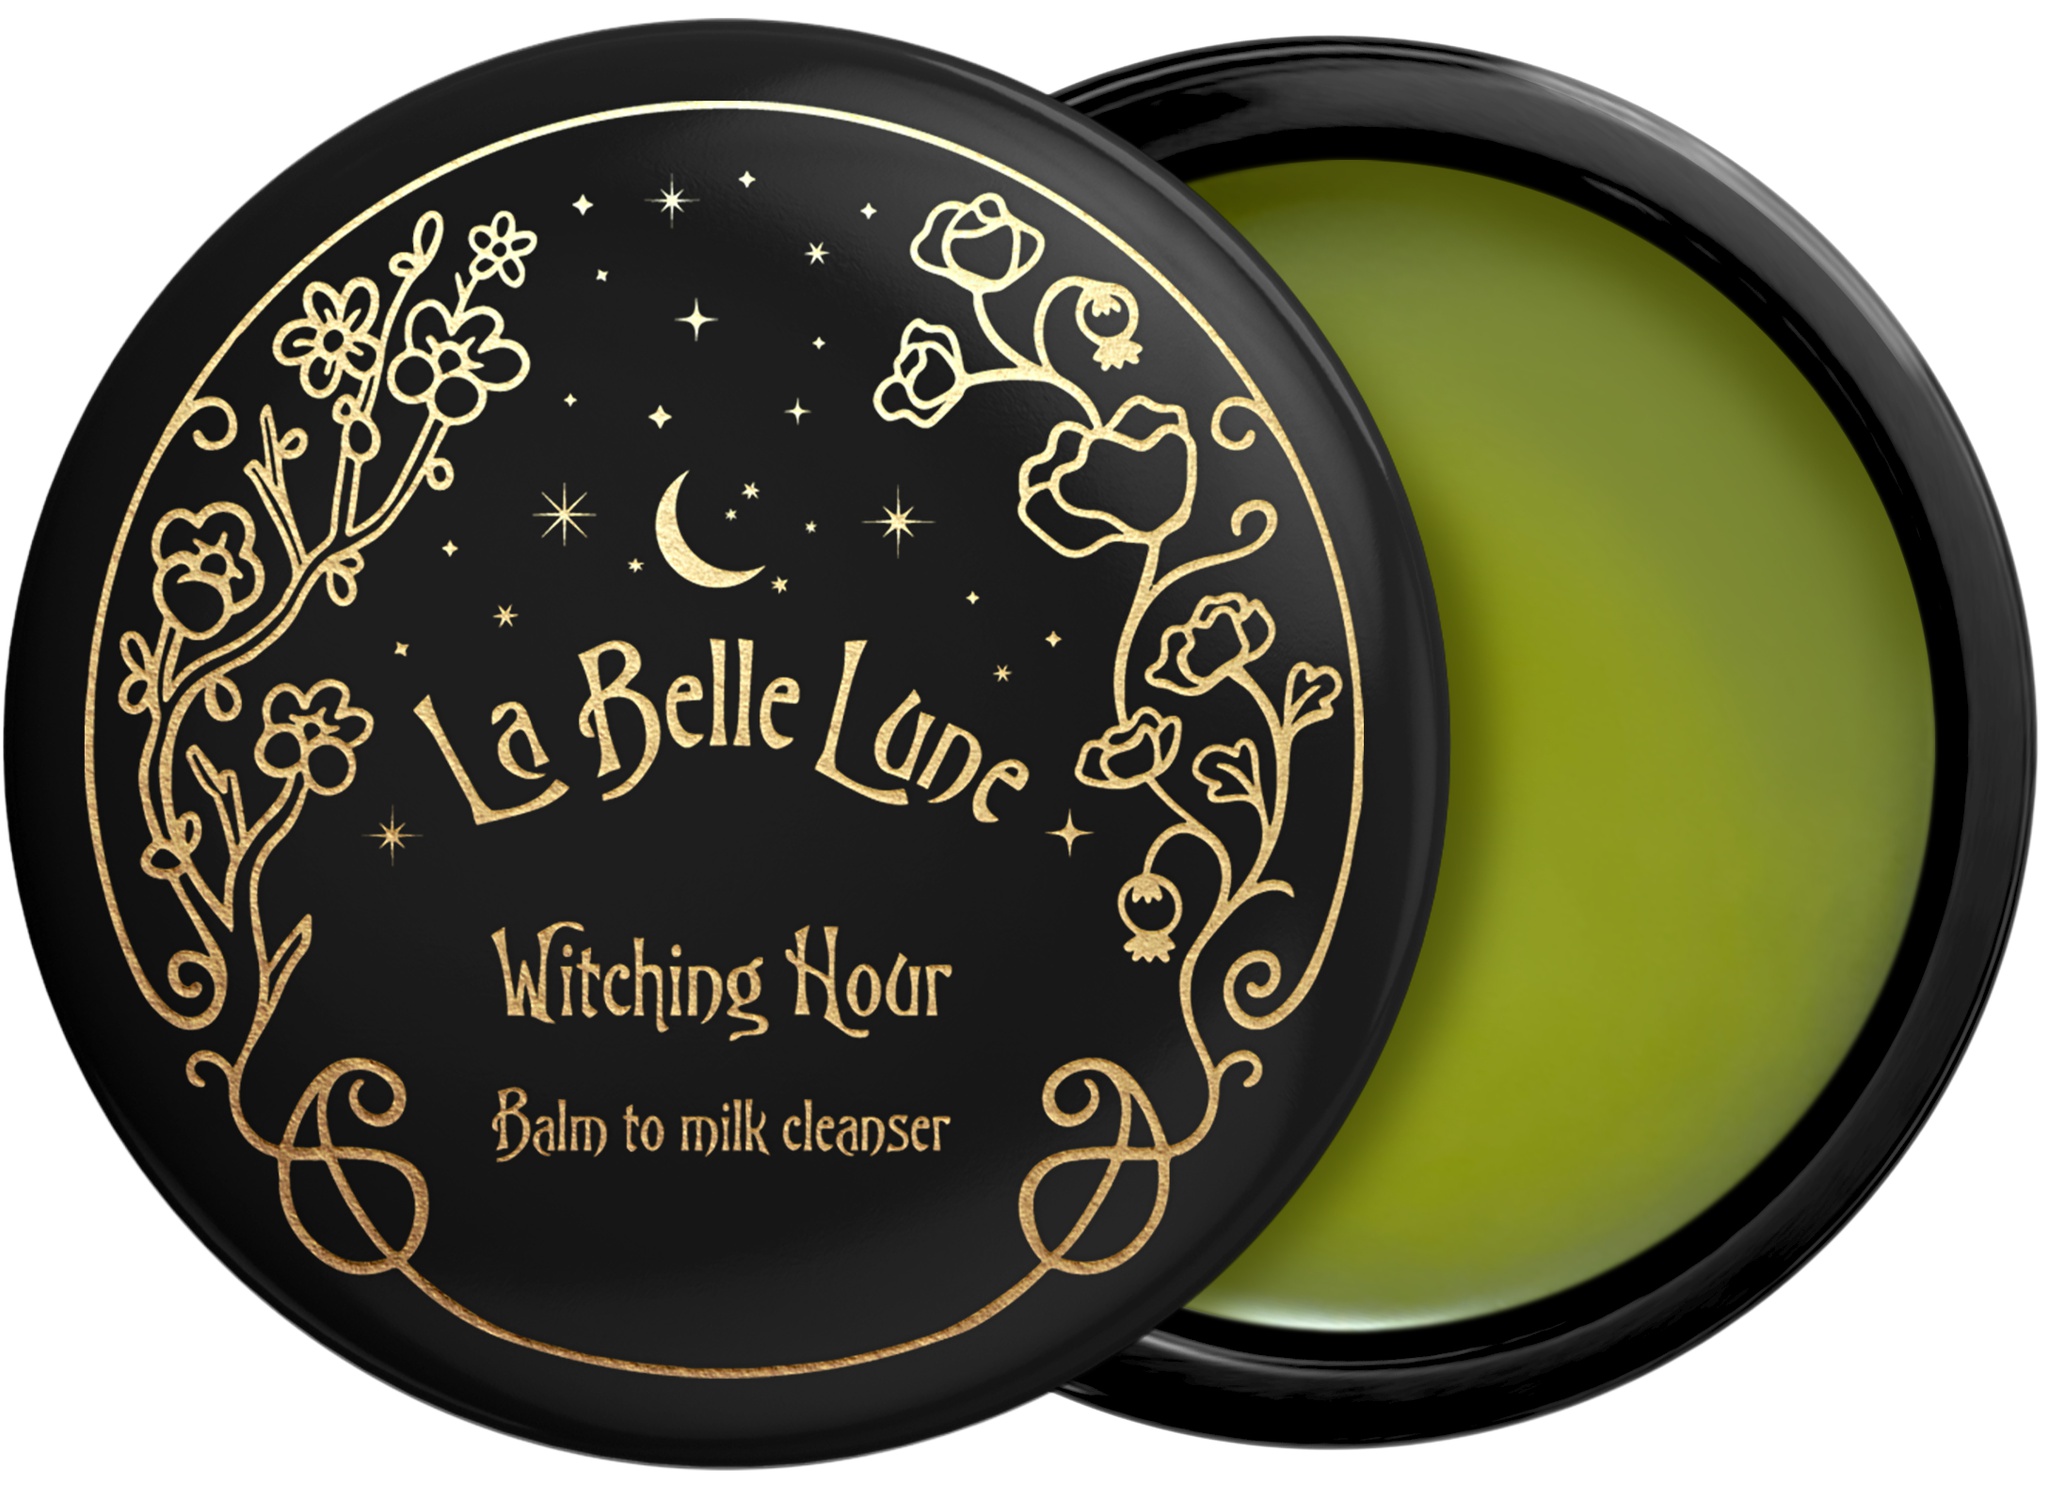 La Belle Lune Witching Hour Balm To Milk Cleanser